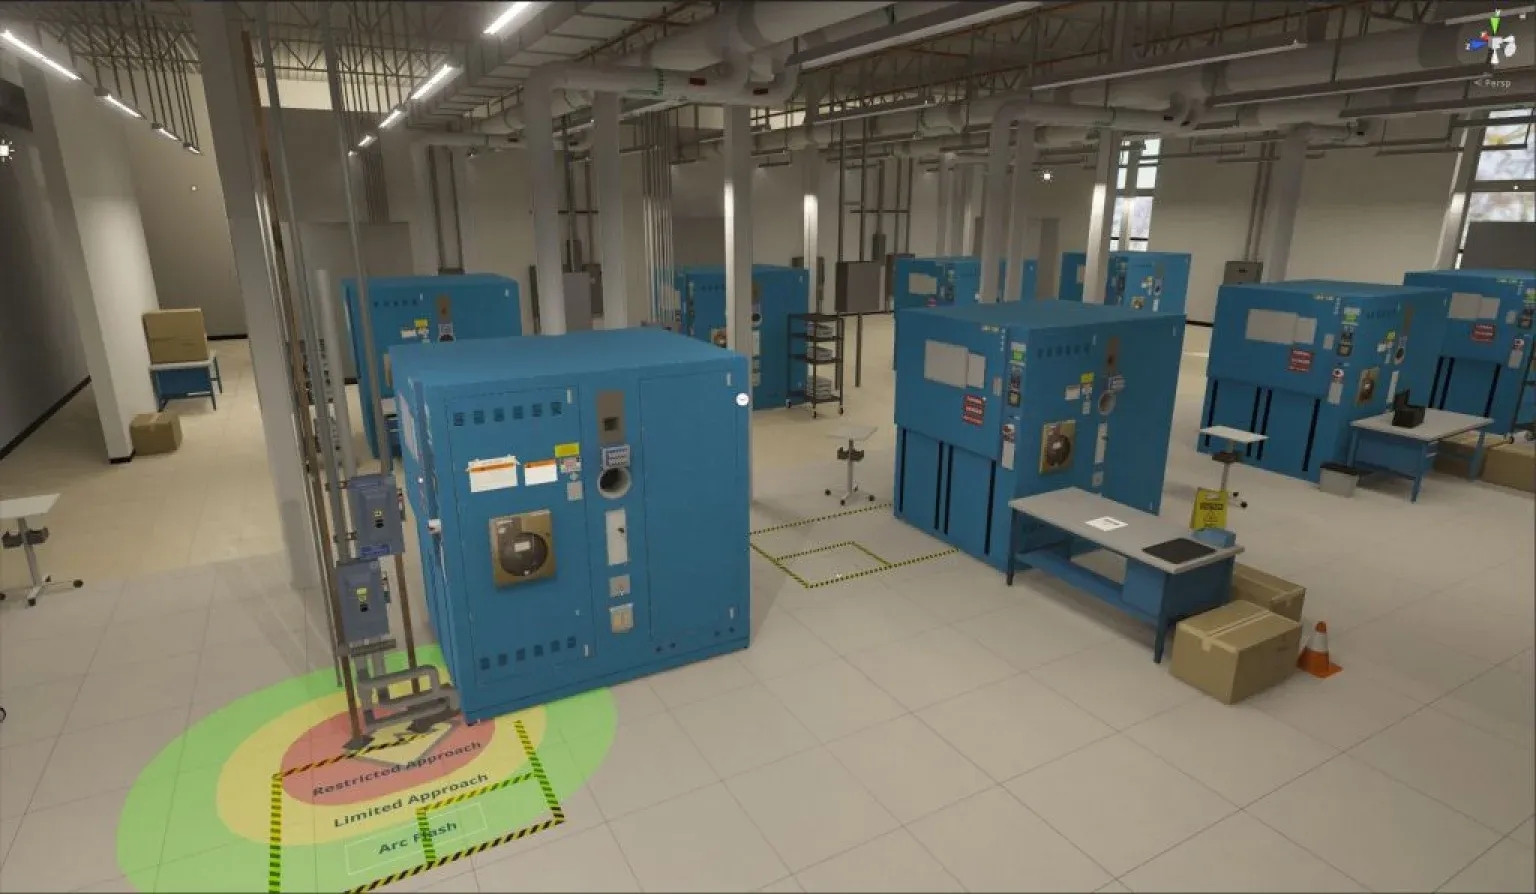 How Intel launched an Electrical Safety Recertification VR training course